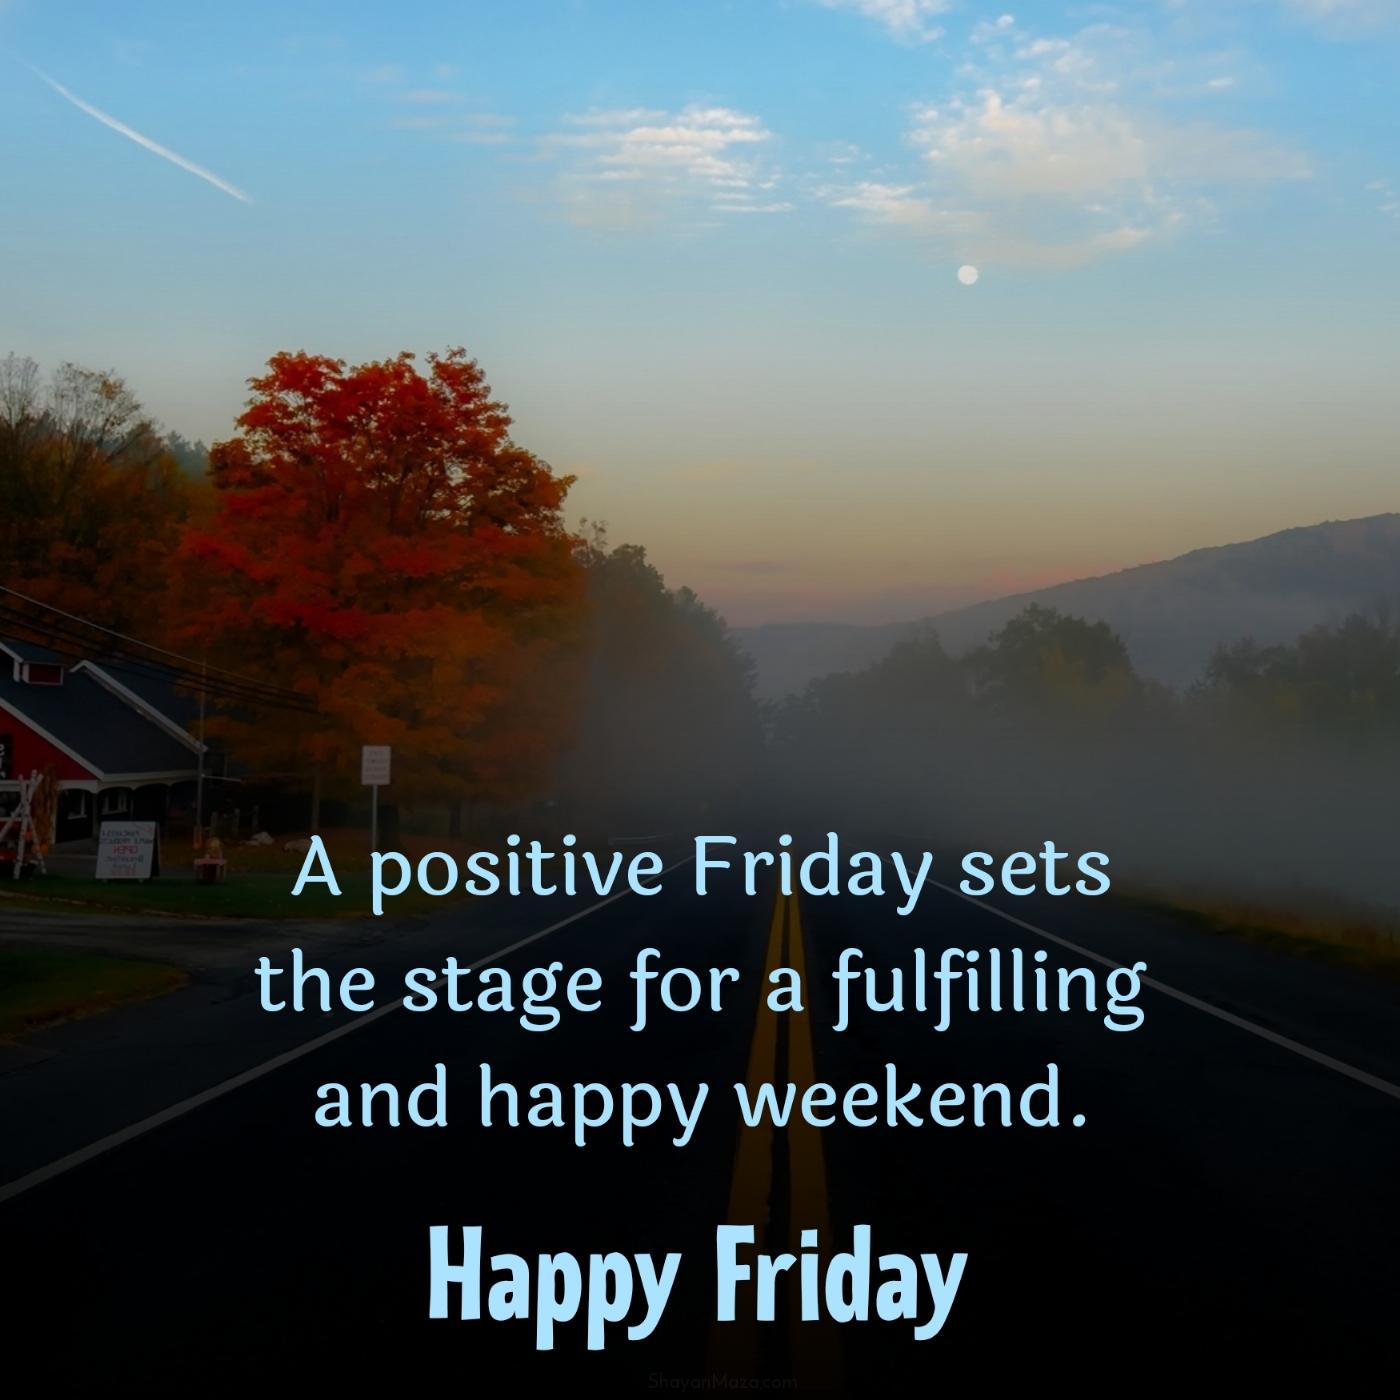 A positive Friday sets the stage for a fulfilling and happy weekend